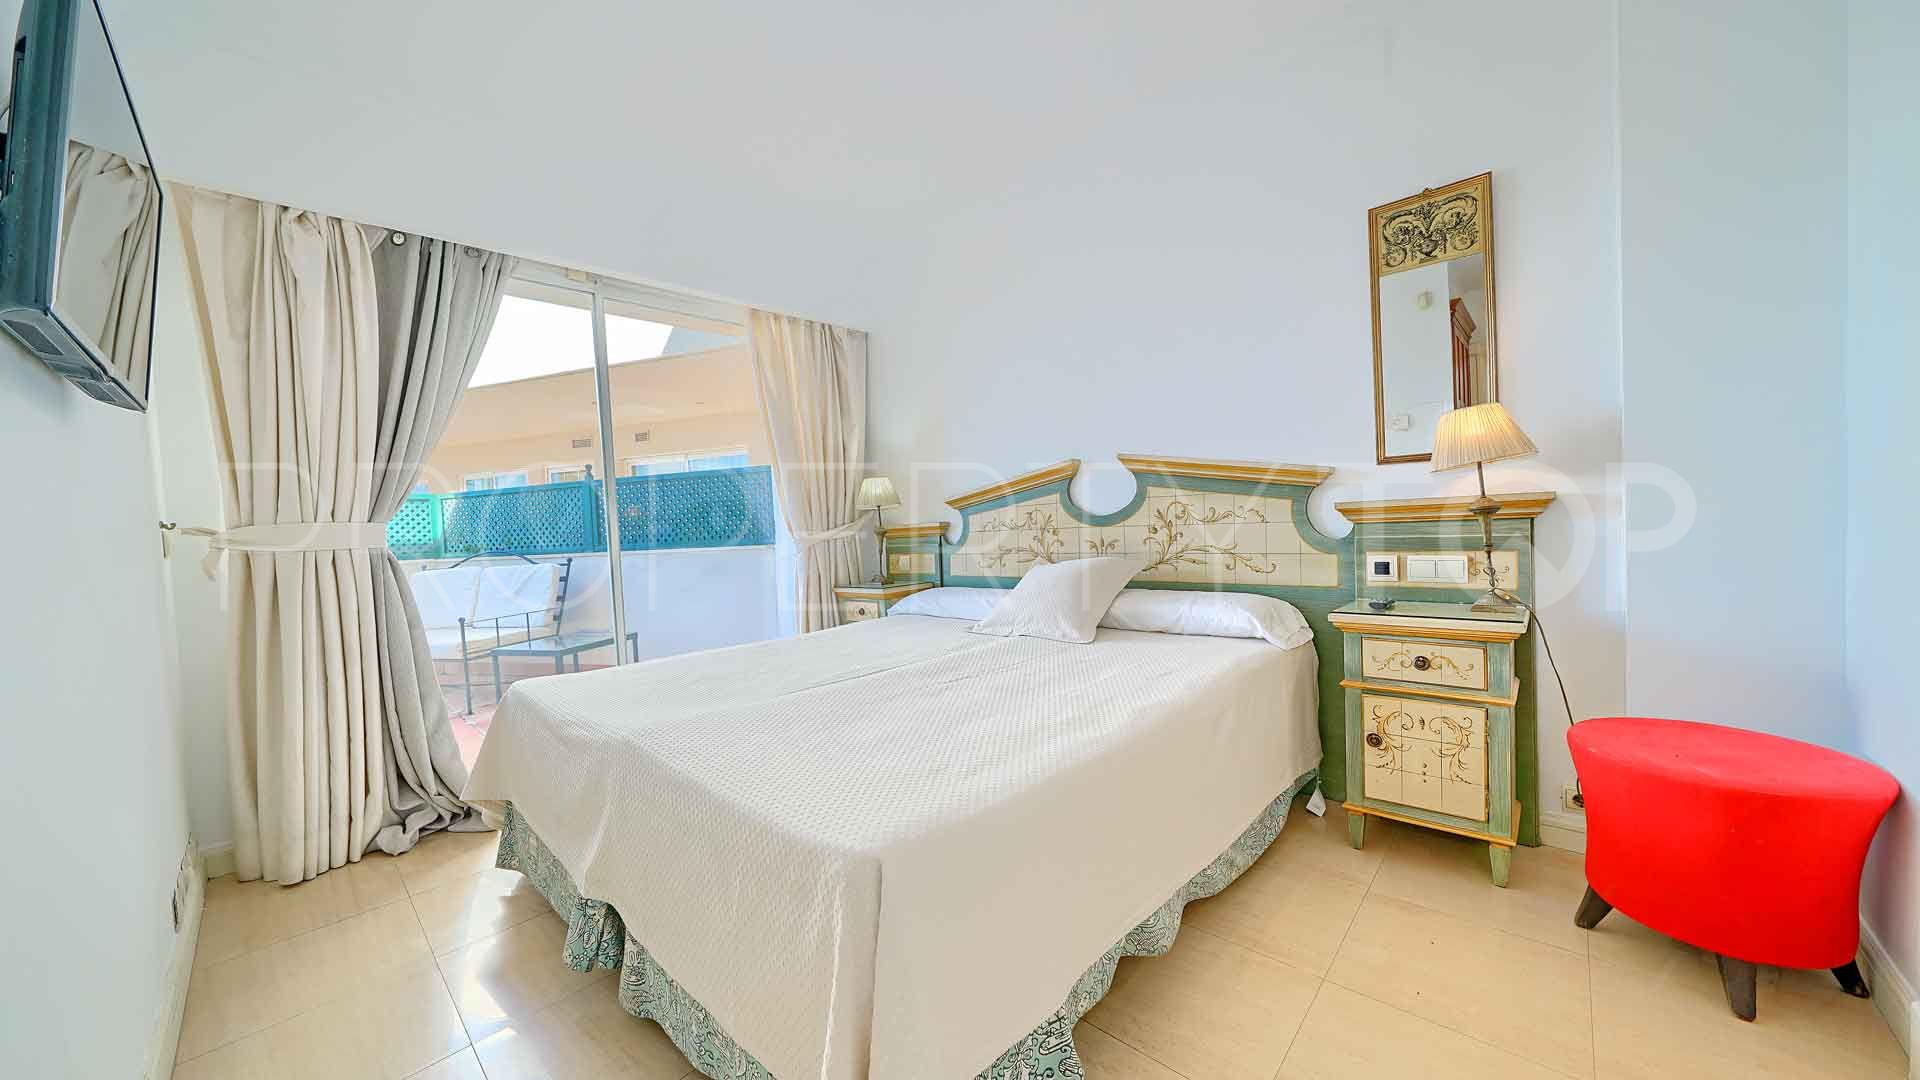 For sale duplex penthouse in Marbella Golden Mile with 3 bedrooms